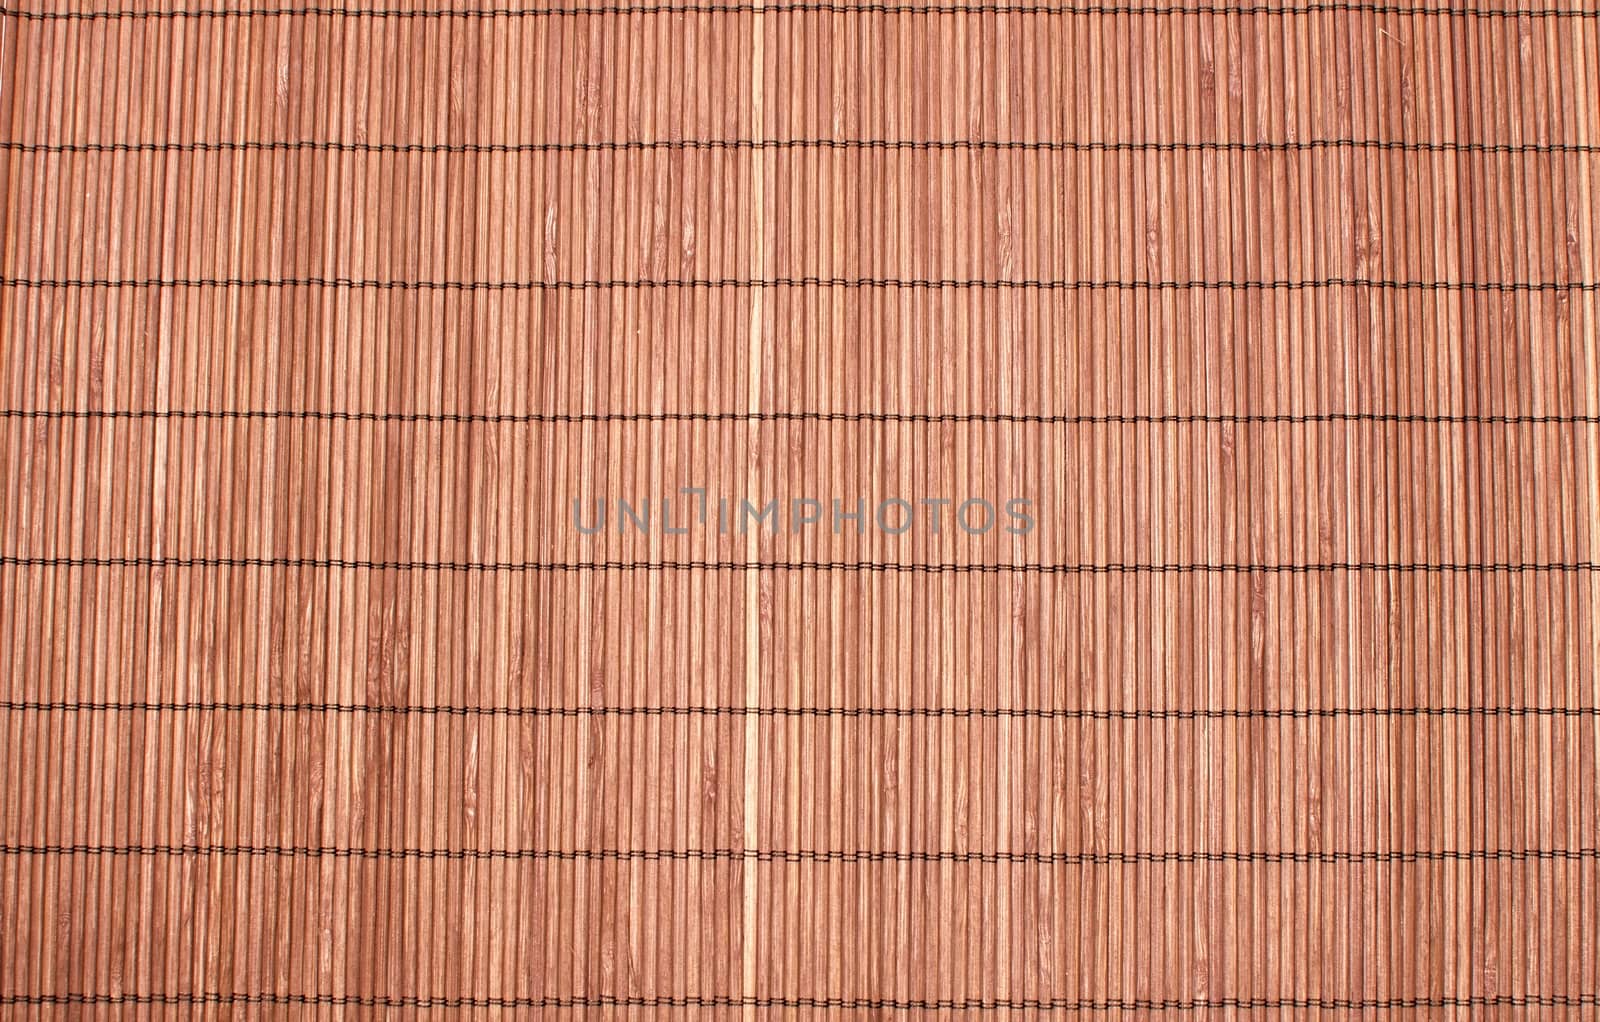 Bamboo brown straw mat as abstract texture background composition, top view above